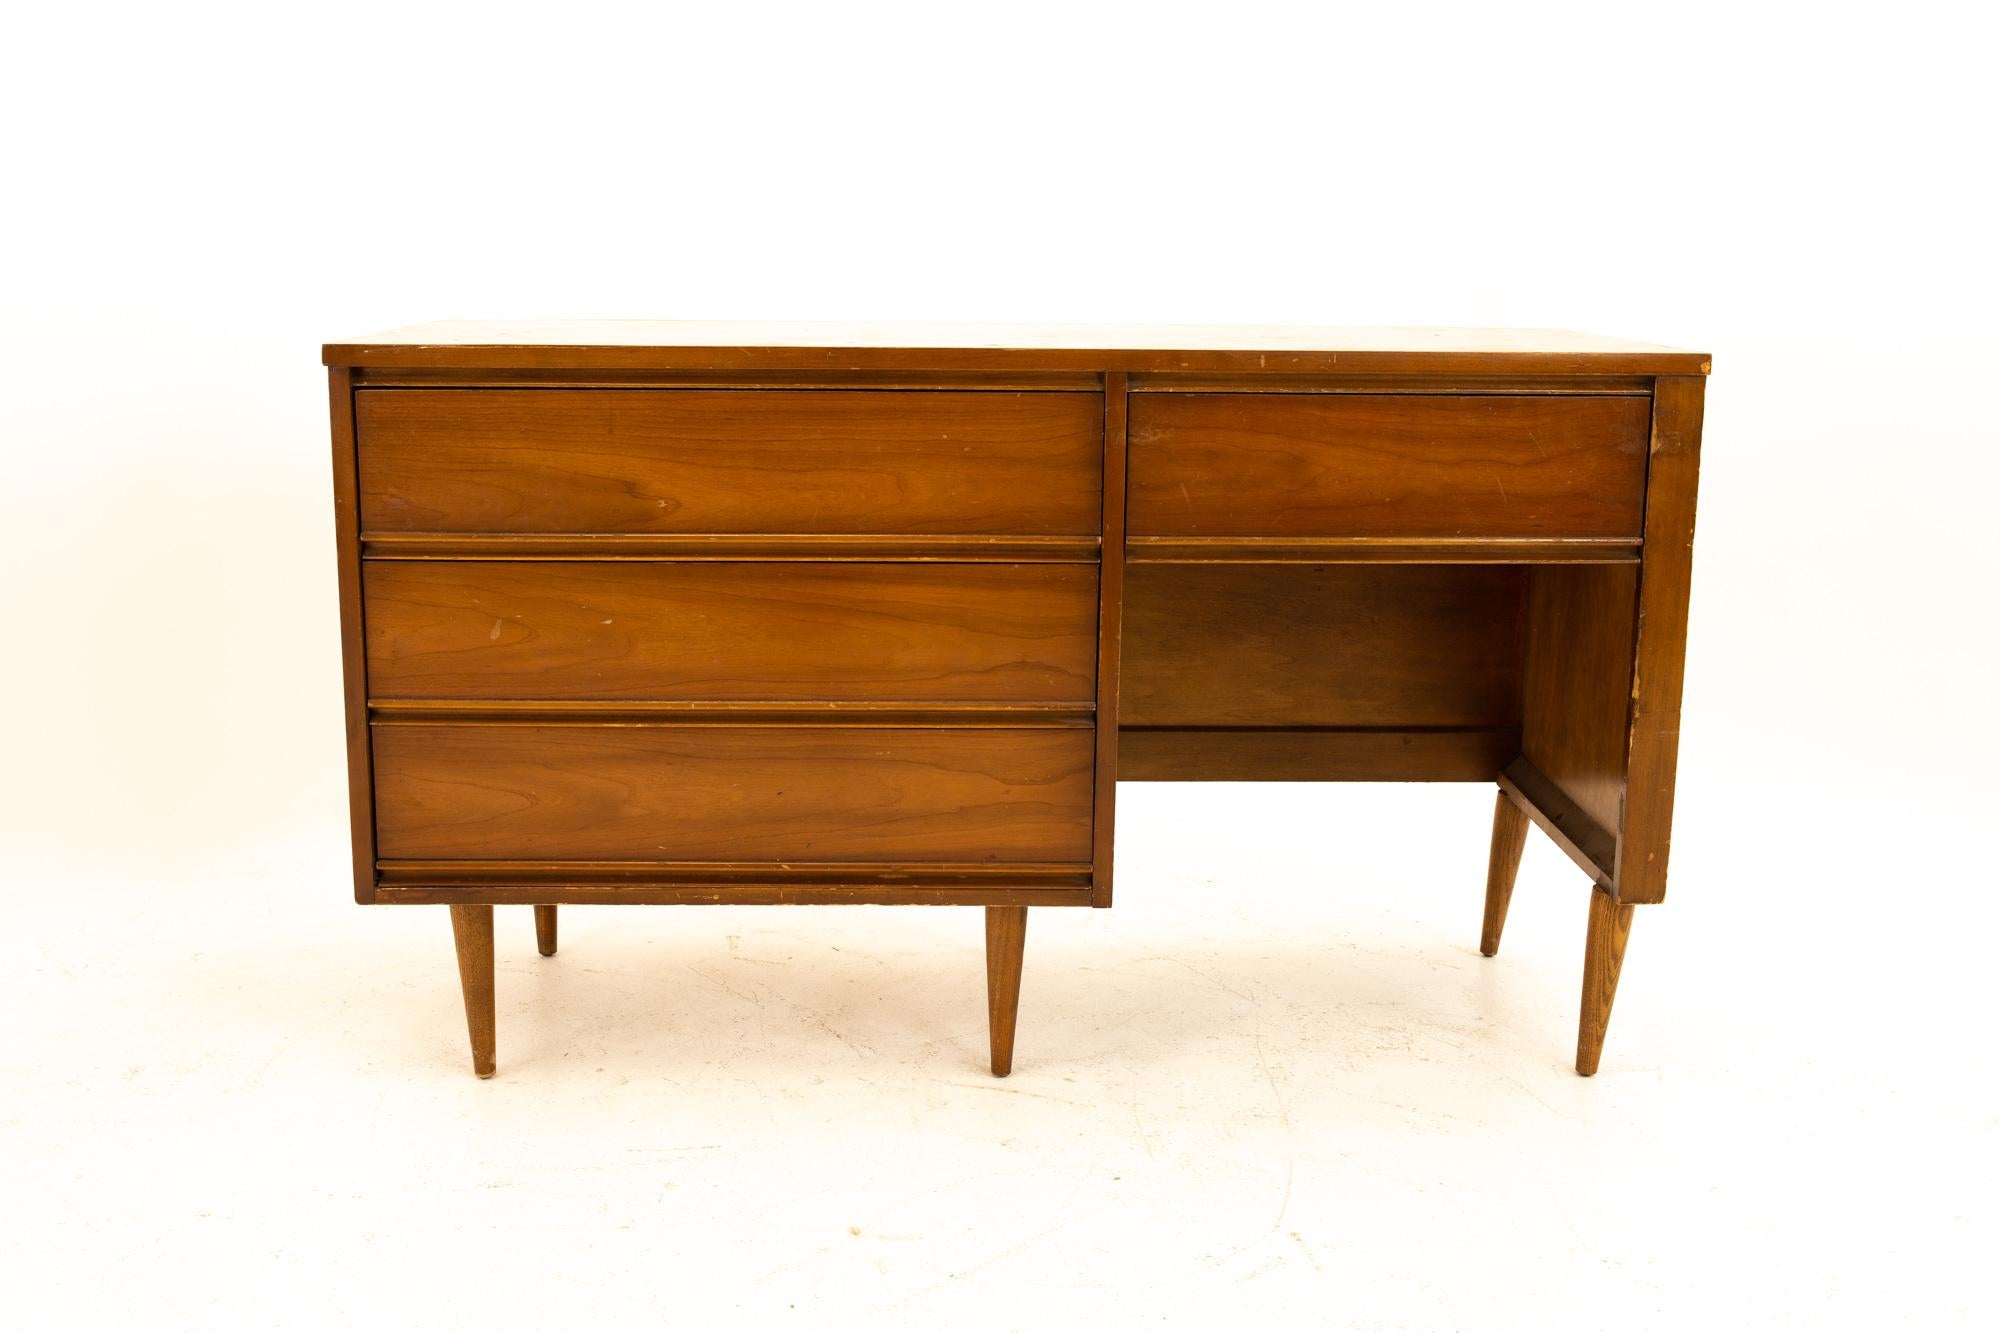 Dixie Mid Century 4-drawer walnut single sided desk
Desk measures: 52.5 wide x 19.5 deep x 30 high

All pieces of furniture can be had in what we call restored vintage condition. This means the piece is restored upon purchase so it’s free of